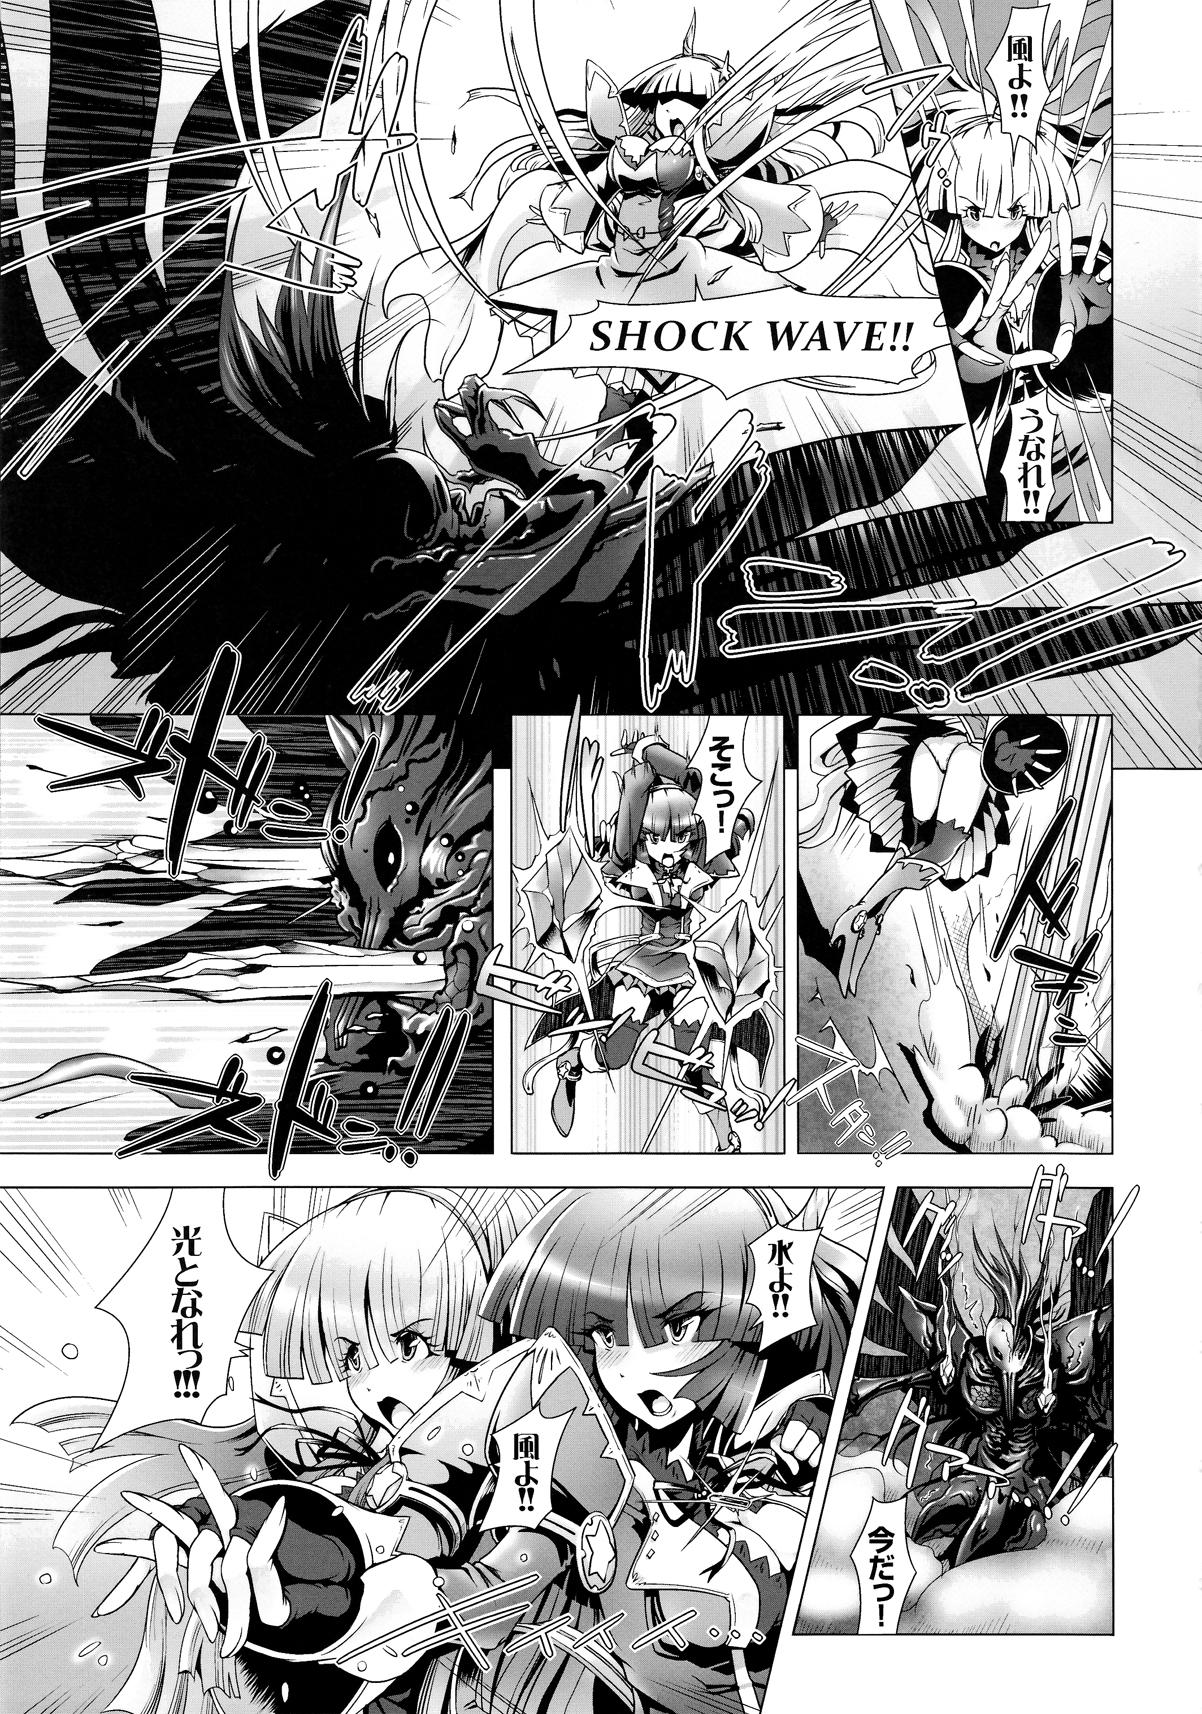 Strange Girls Cross Synthesis Abuse - Page 7